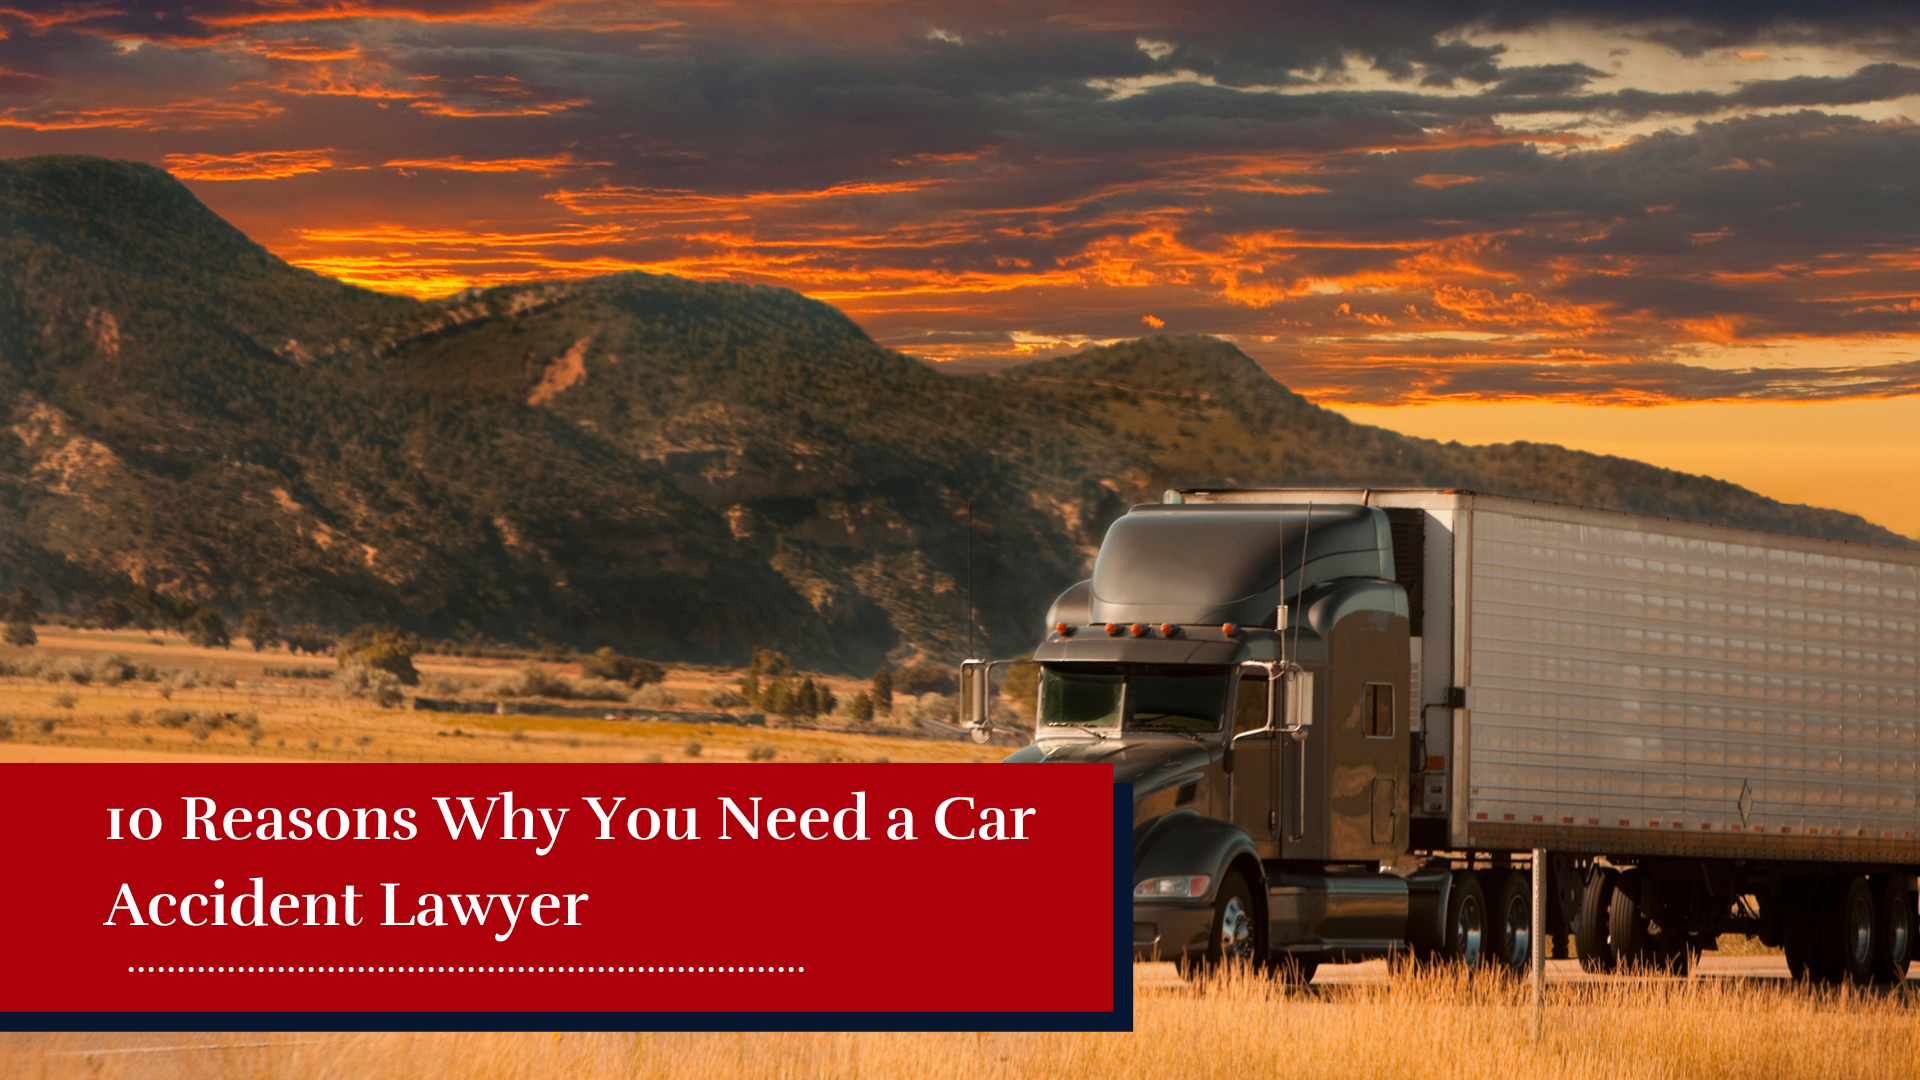 10 Reasons Why You Need a Car Accident Lawyer